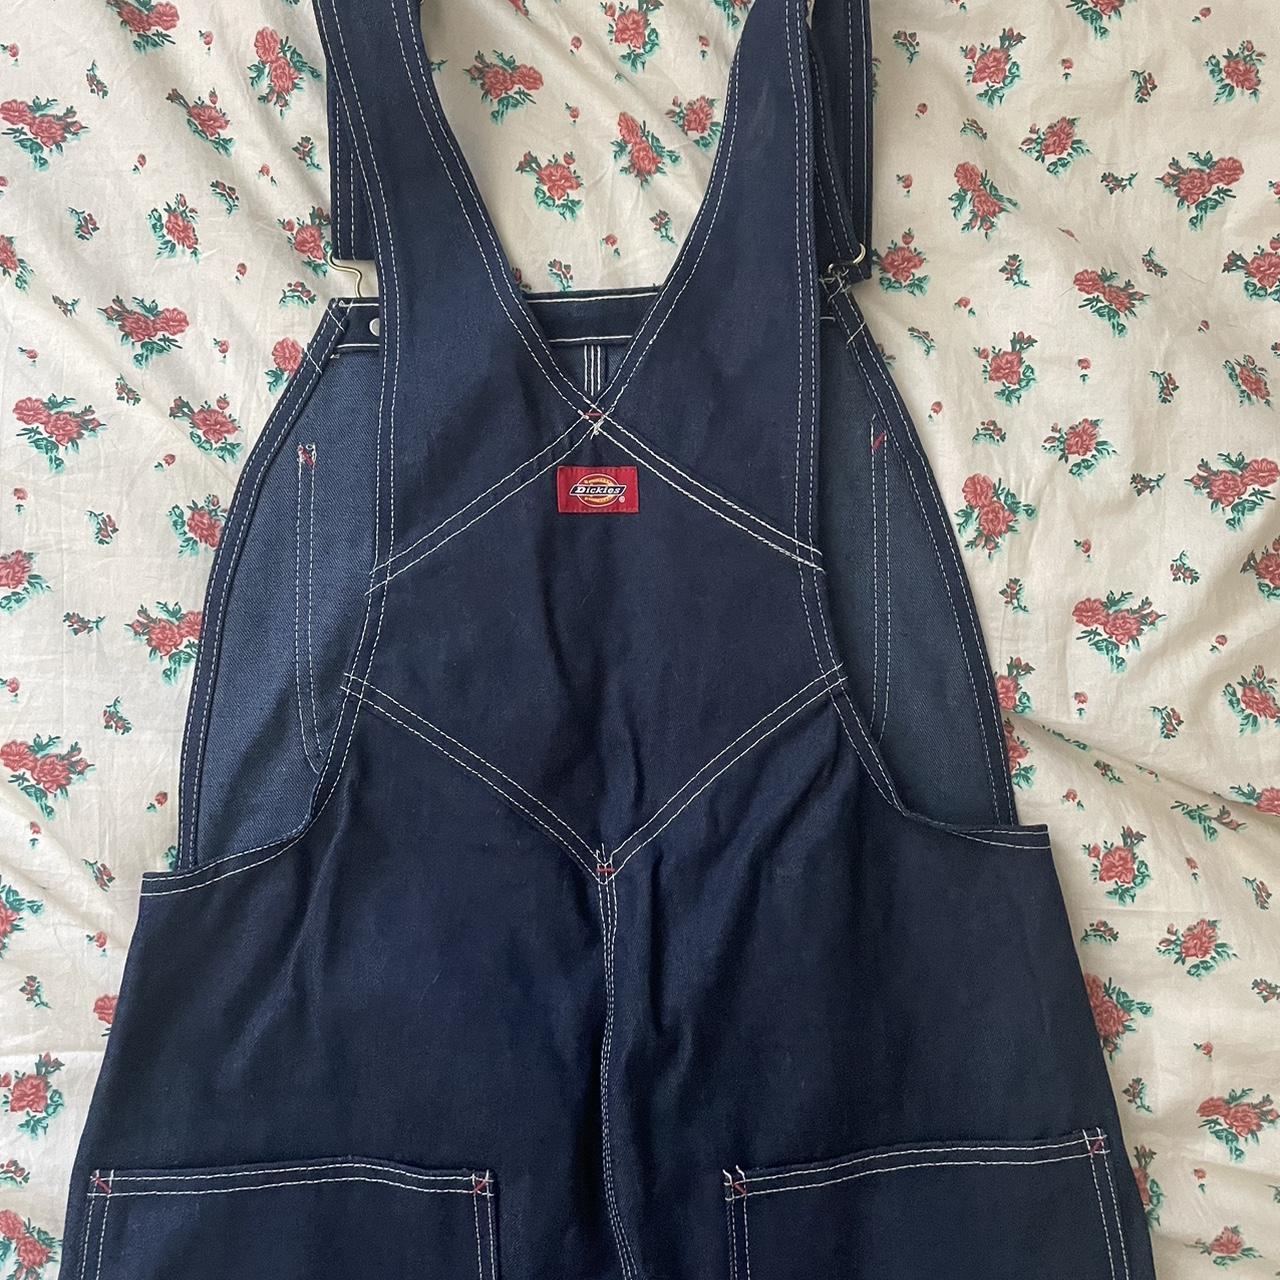 New condition dickies overalls! With adjustable... - Depop